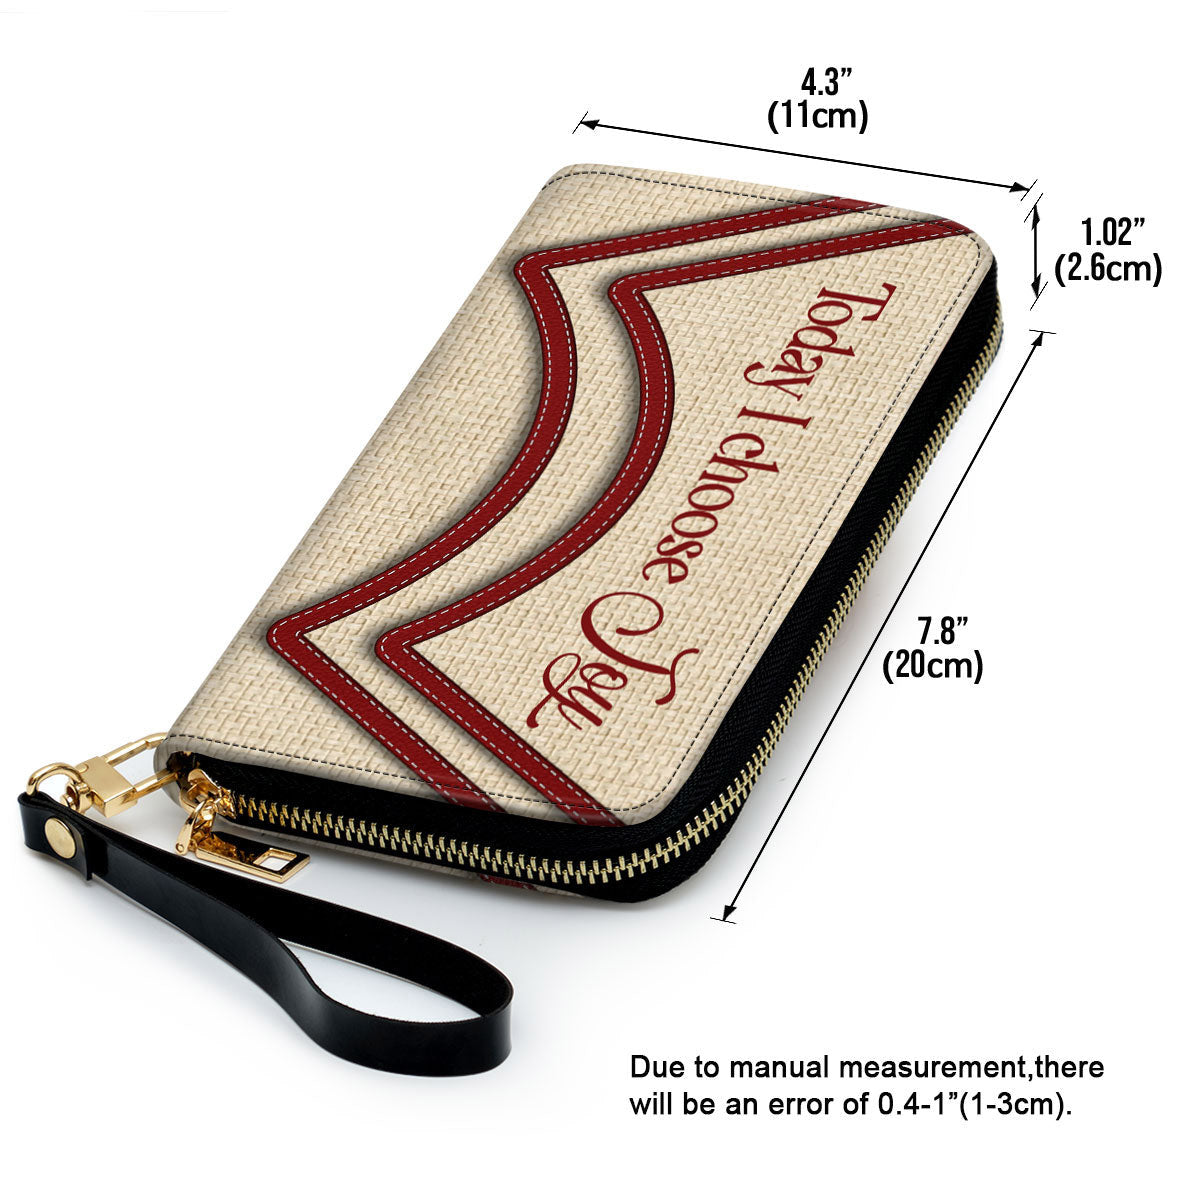 Today I Choose Joy Stunning Clutch Purse For Women - Personalized Name - Christian Gifts For Women